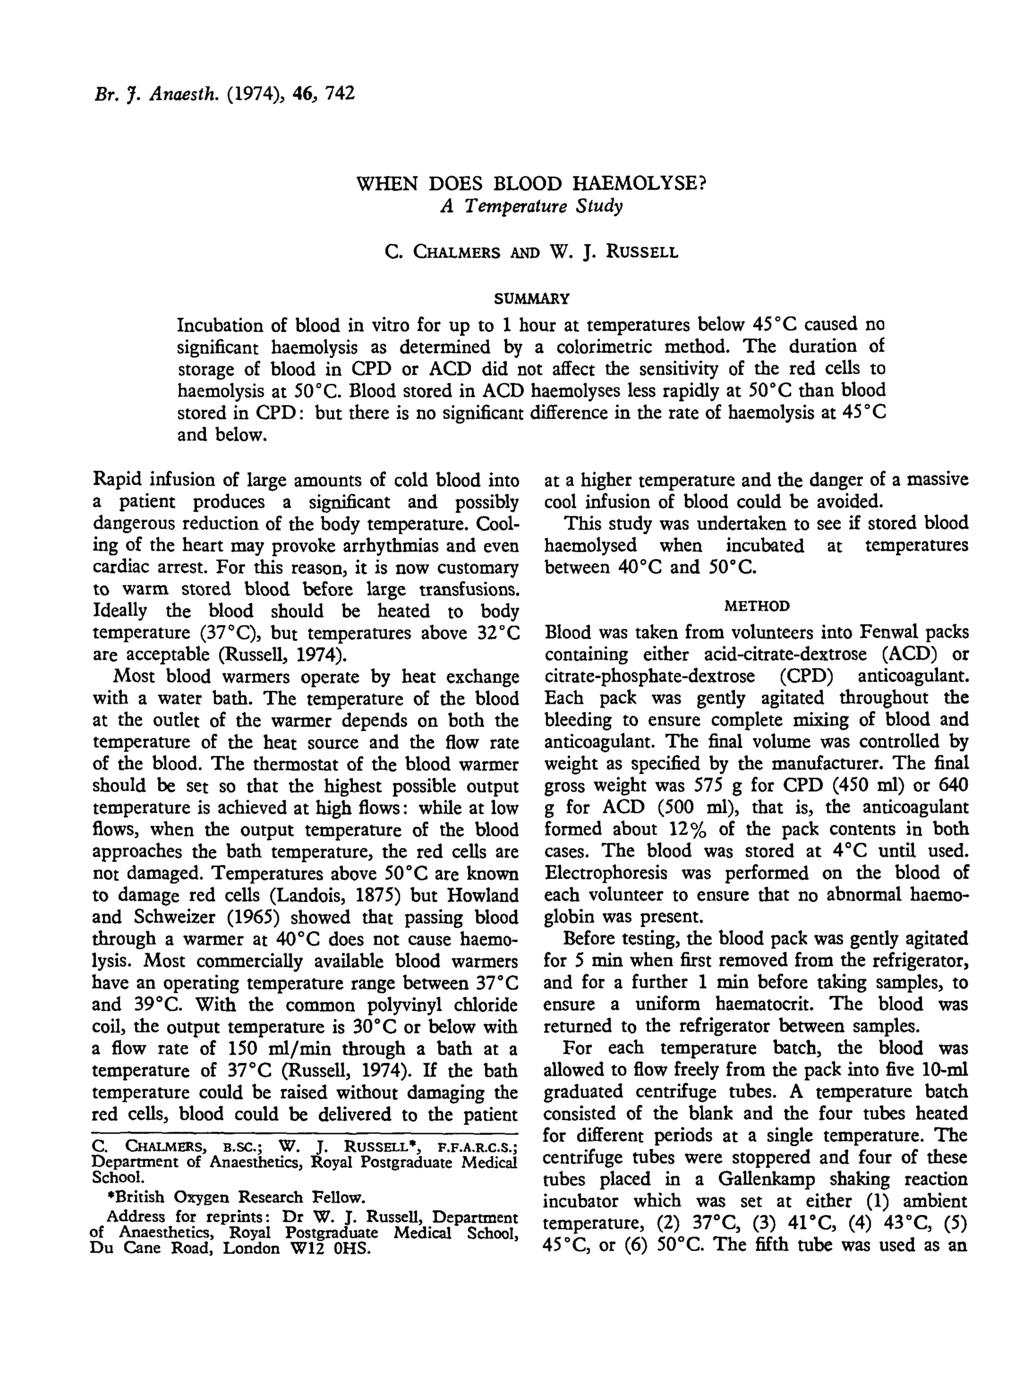 Br. J. Anaesth. (1974), 46, 742 WHEN DOES BLOOD HAEMOLYSE? A Temperature Study C. CHALMERS AND W. J. RUSSELL SUMMARY Incubation of blood in vitro for up to 1 hour at temperatures below 45 C C caused no significant haemolysis as determined by a colorimetric method.